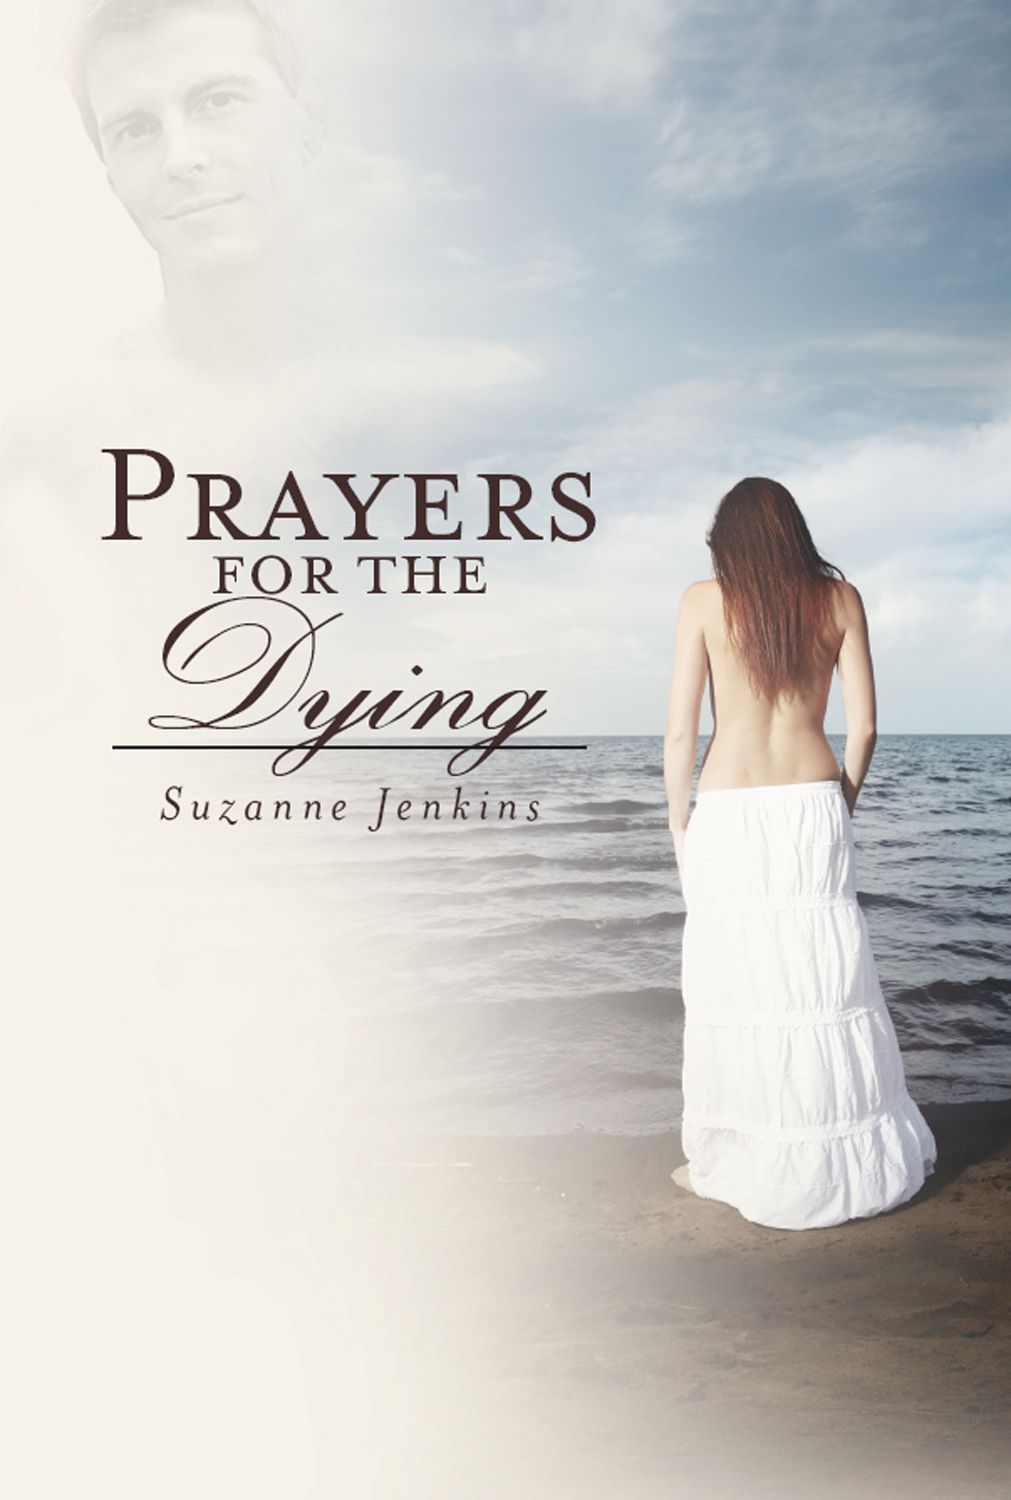 Prayers for the Dying (Pam of Babylon Book Four) by Jenkins, Suzanne